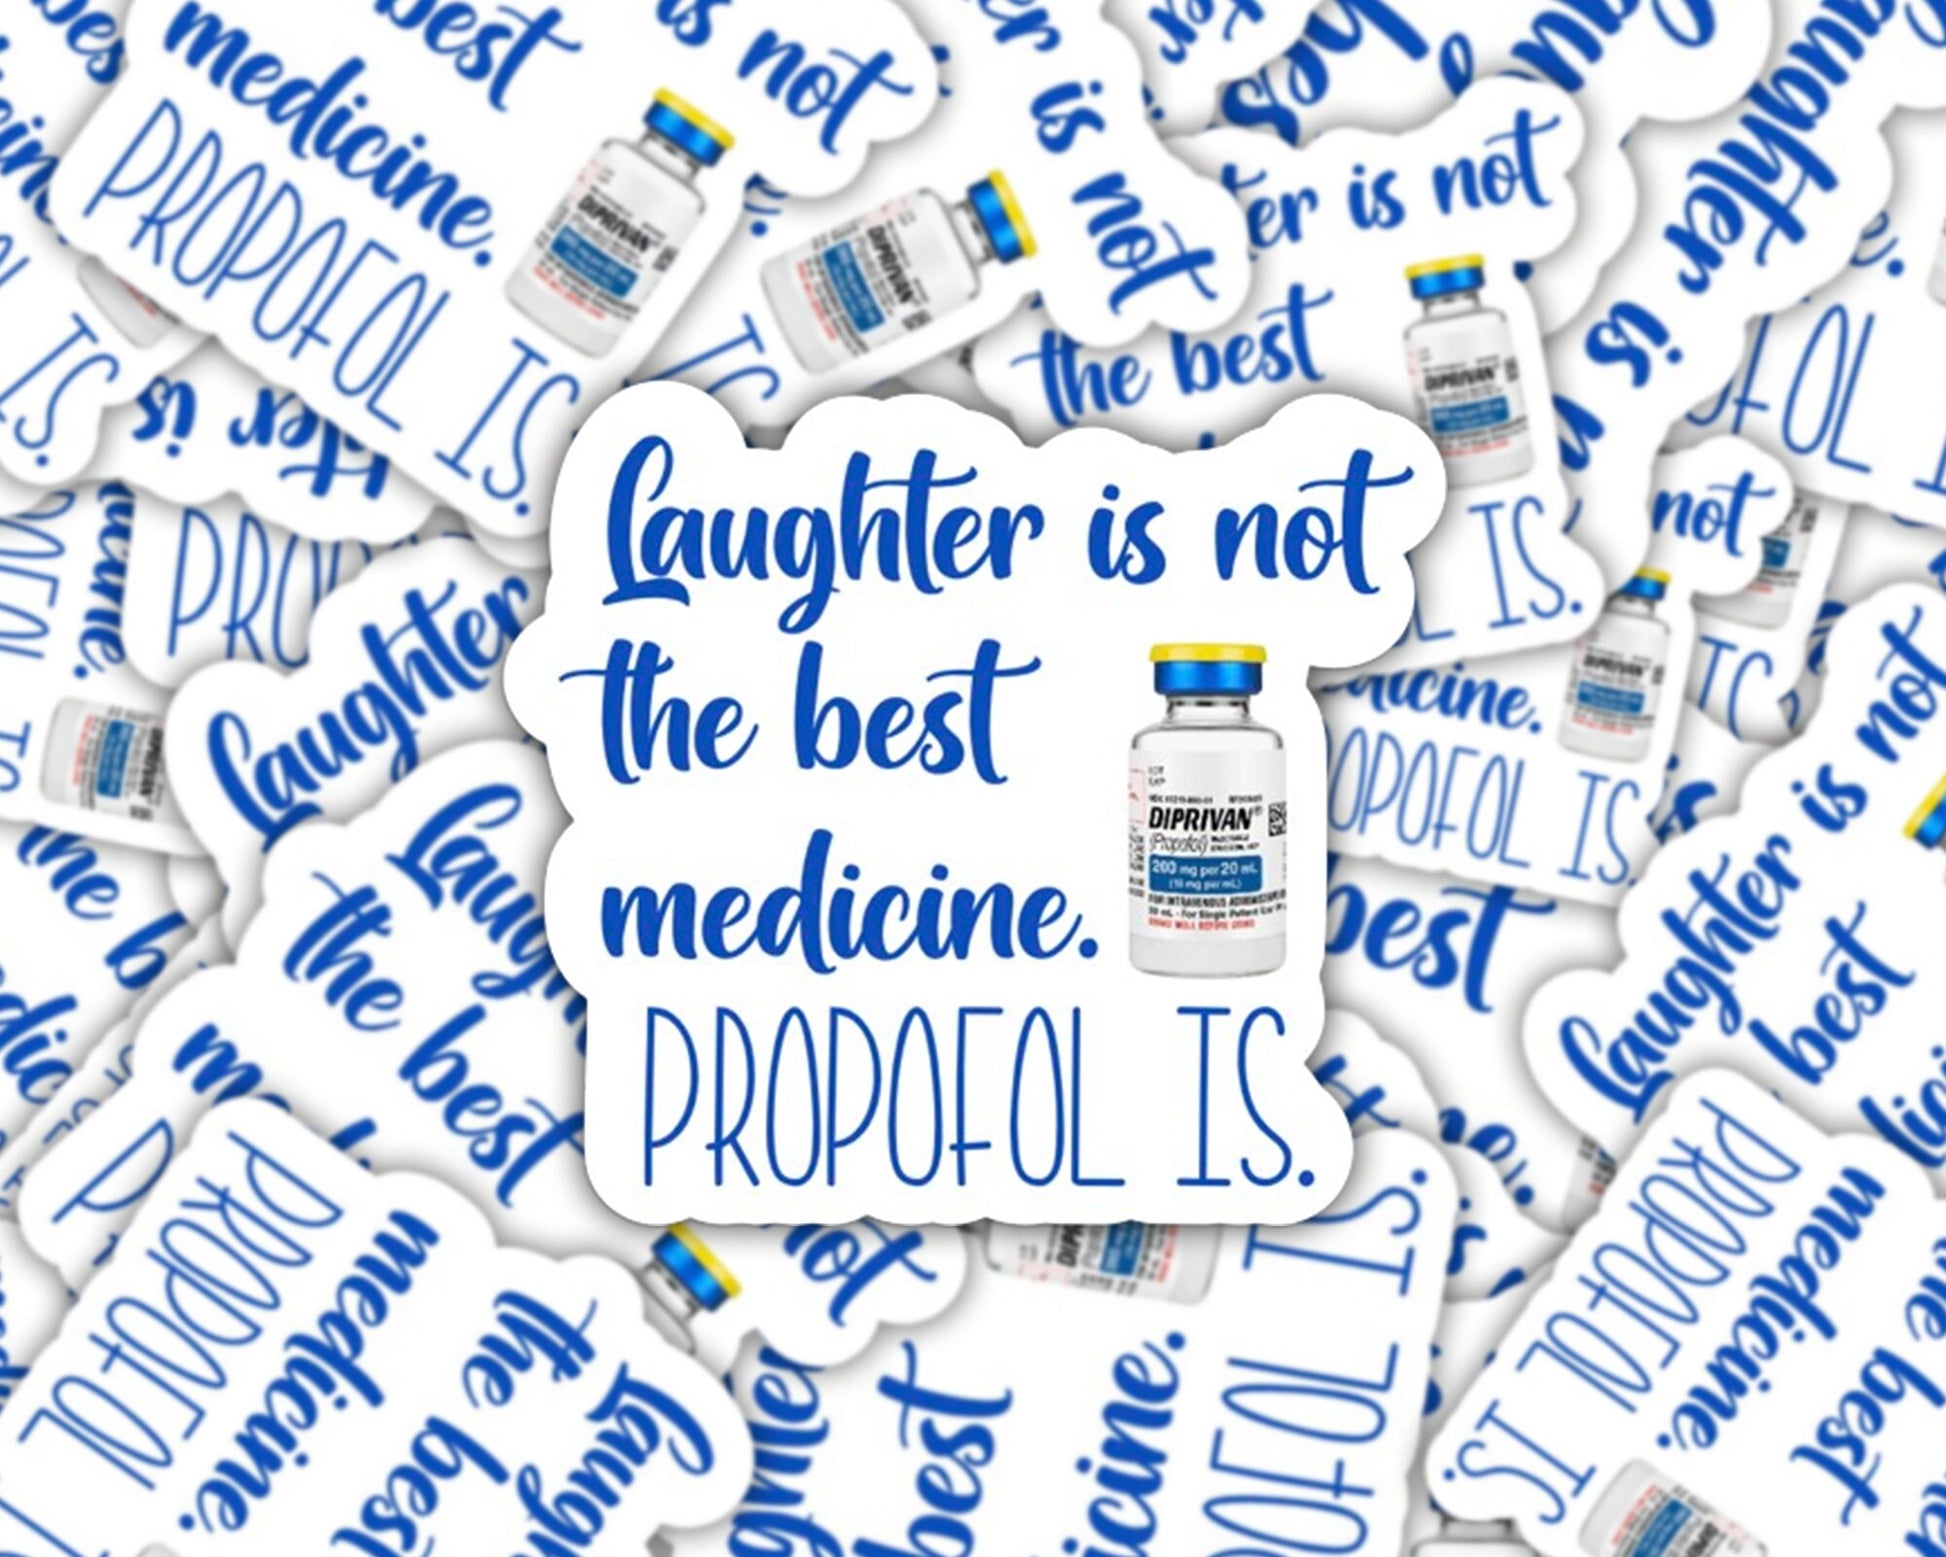 icu nurse stickers, respiratory sticker, pharmacist sticker, laughter is not the best medicine propofol is, pharmacy stickers, medication